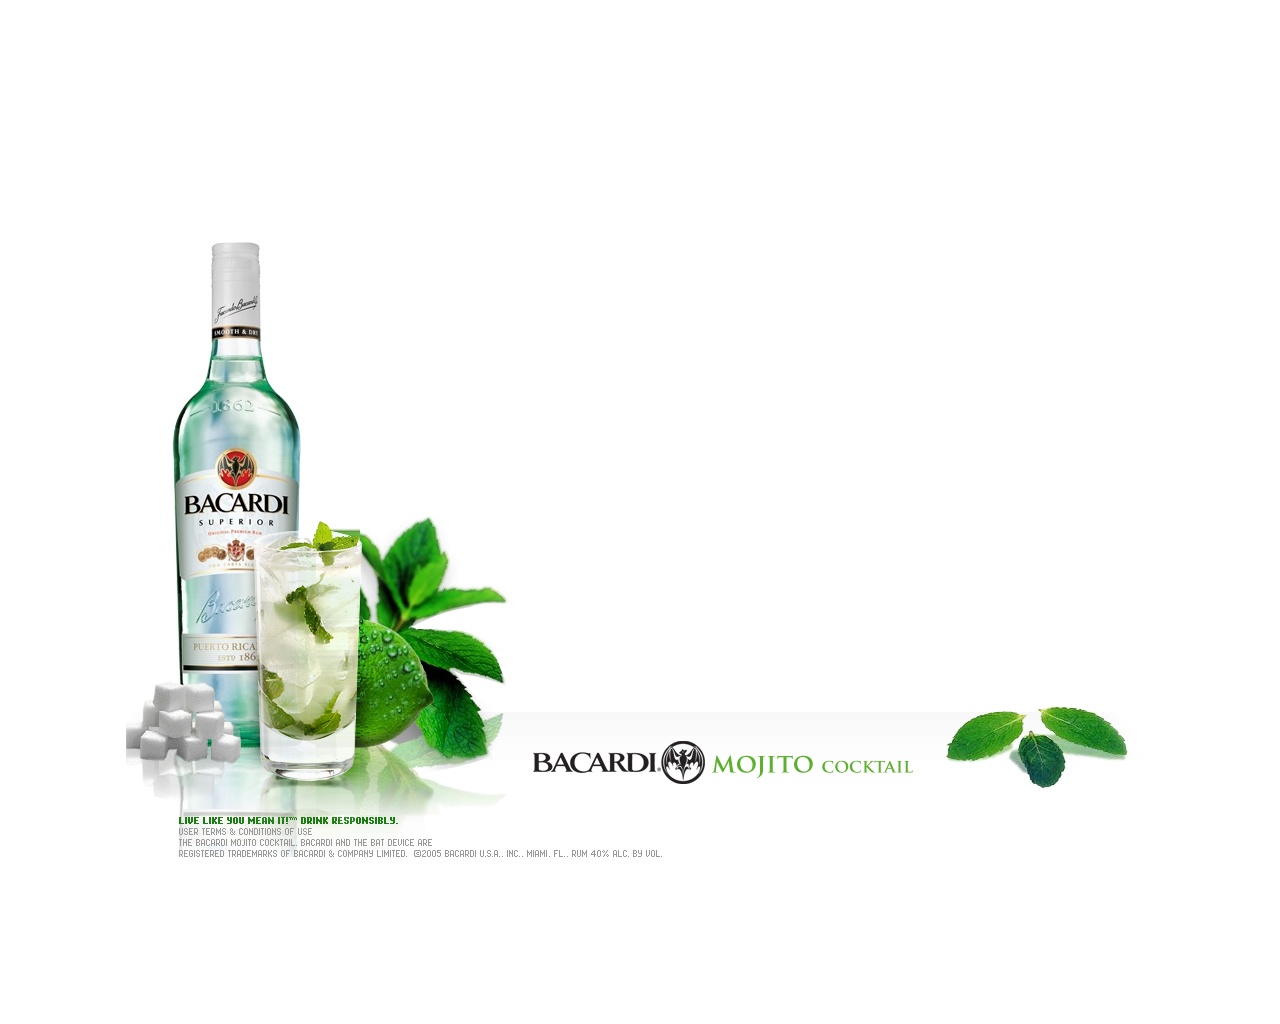 Free Download Bacardi Mojito Cocktail Drink Picture HD Wallpaper Image